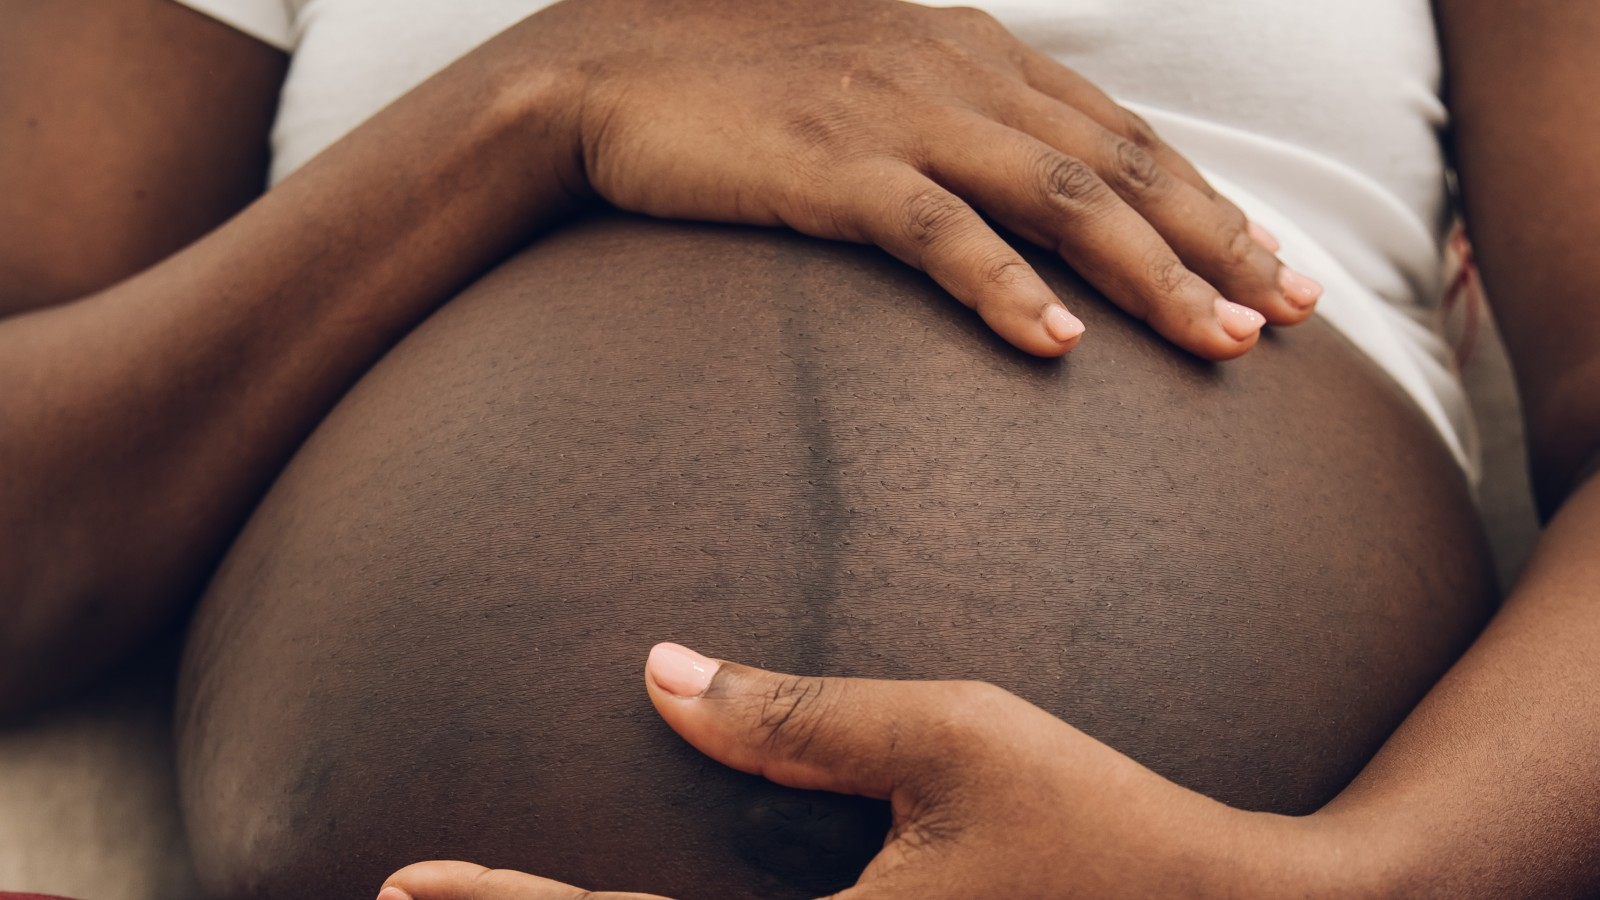 Pa. Black Maternal Health Caucus pledges to reduce maternal mortality rates